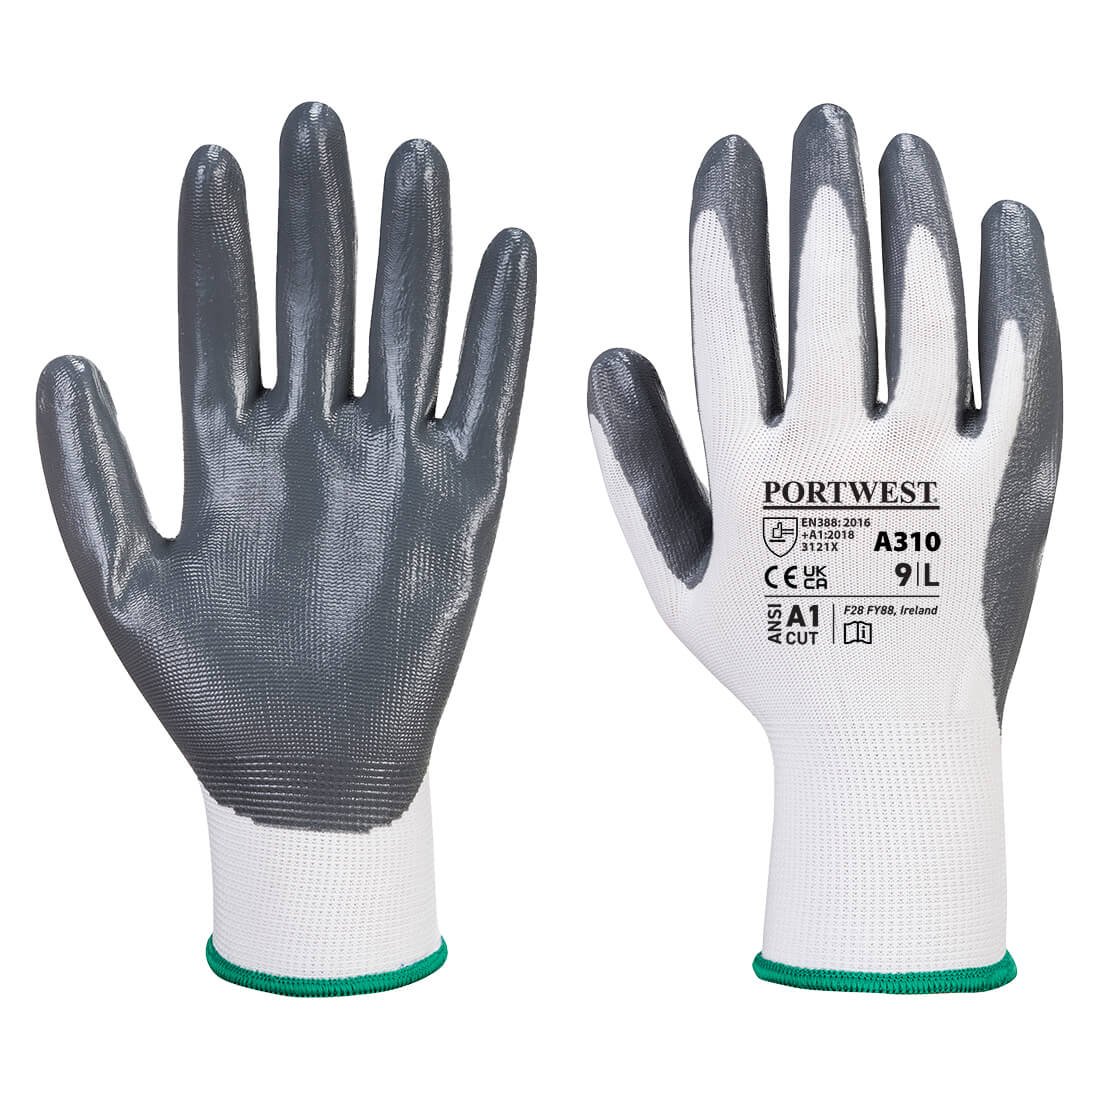 Portwest Cut Resistant Hand Gloves suppliers in Hyderabad, Telangana, India